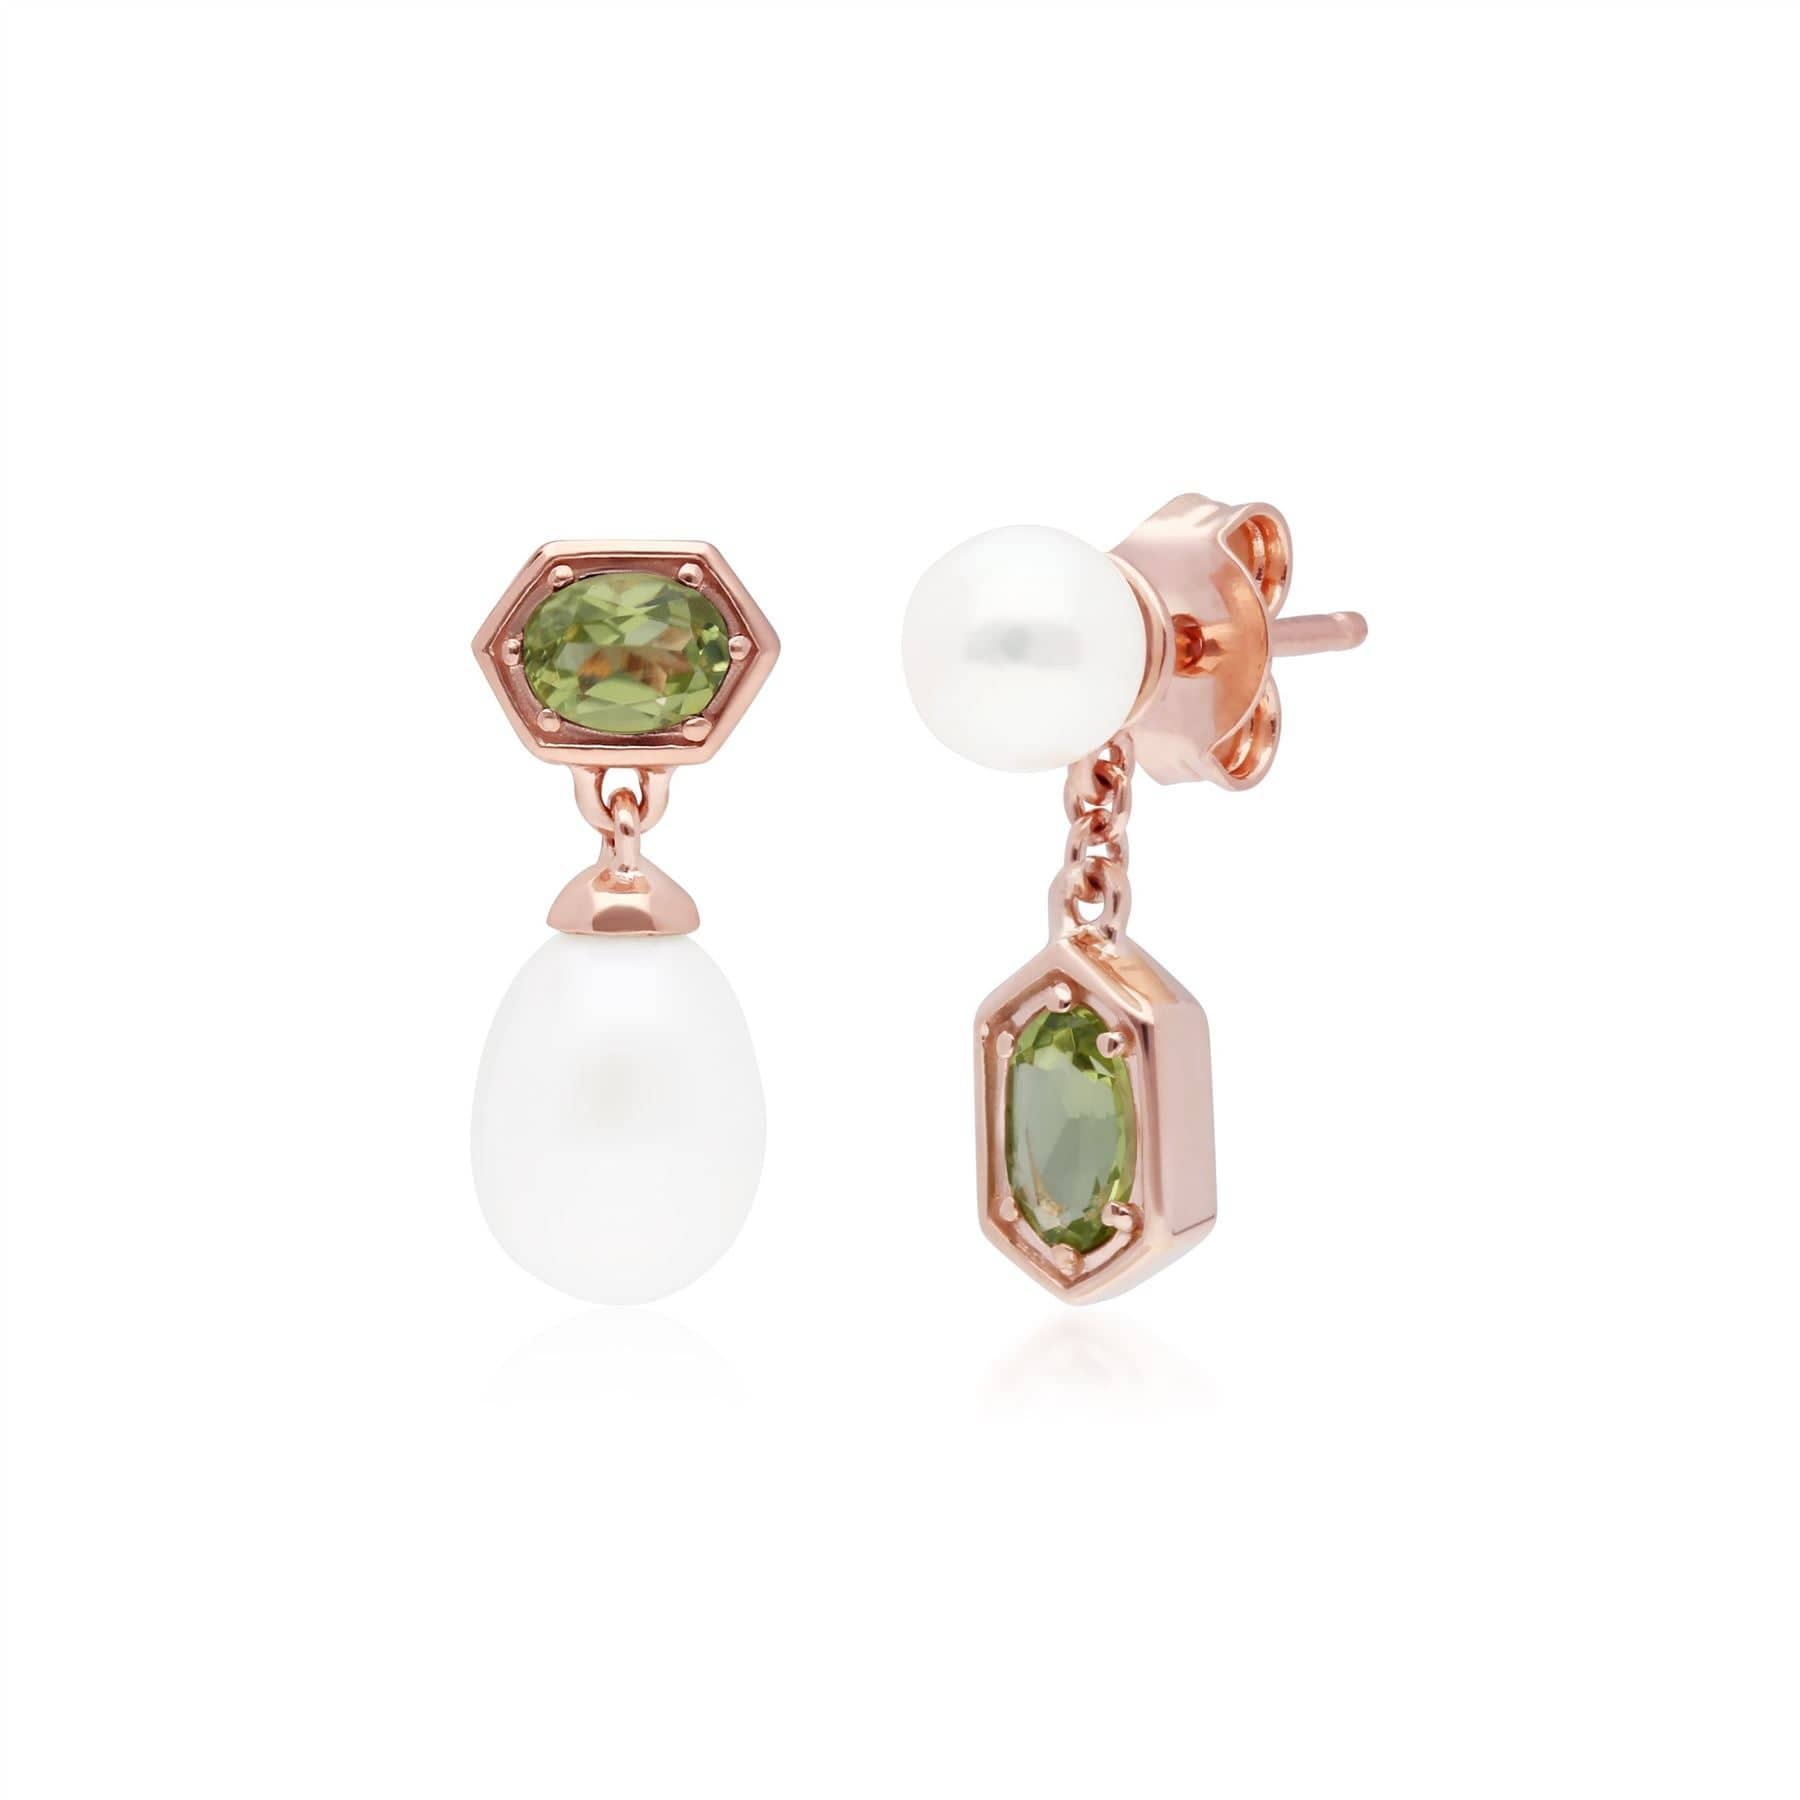 Modern Pearl & Peridot Mismatched Drop Earrings in Rose Gold Plated Sterling Silver